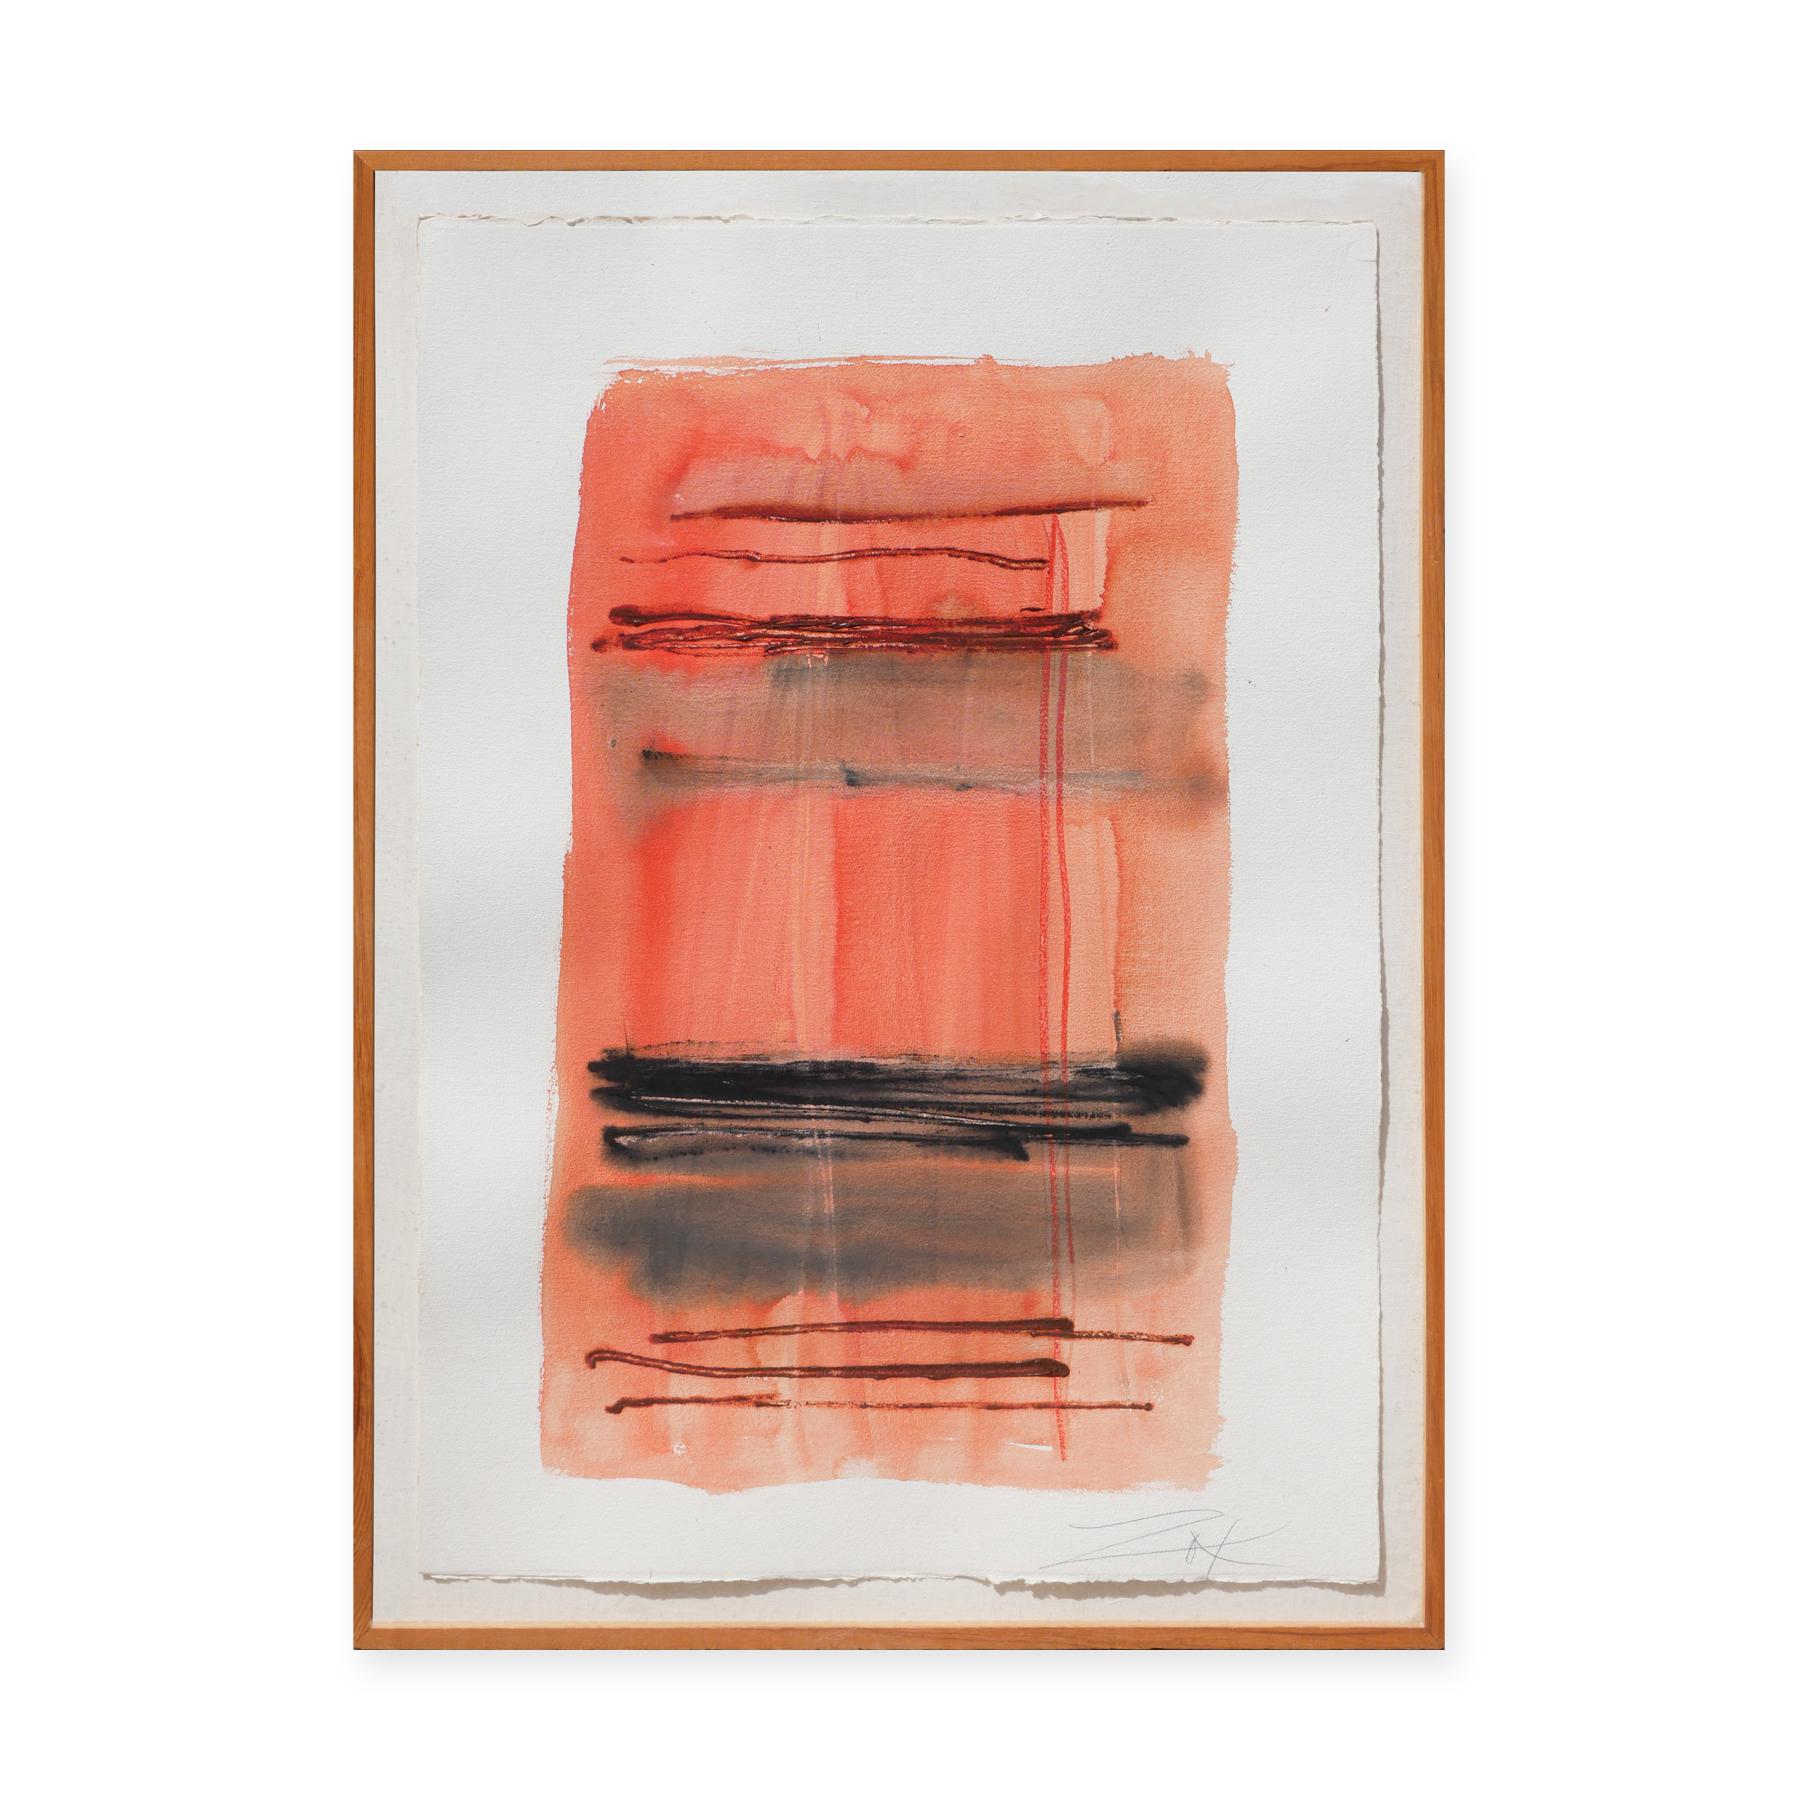 Untitled orange toned abstract watercolor painting by American painter Larry Zox. The work features a pastel orange wash of color accented with black horizontal lines. Signed in pencil in the front lower right worker. Currently hung in a light,